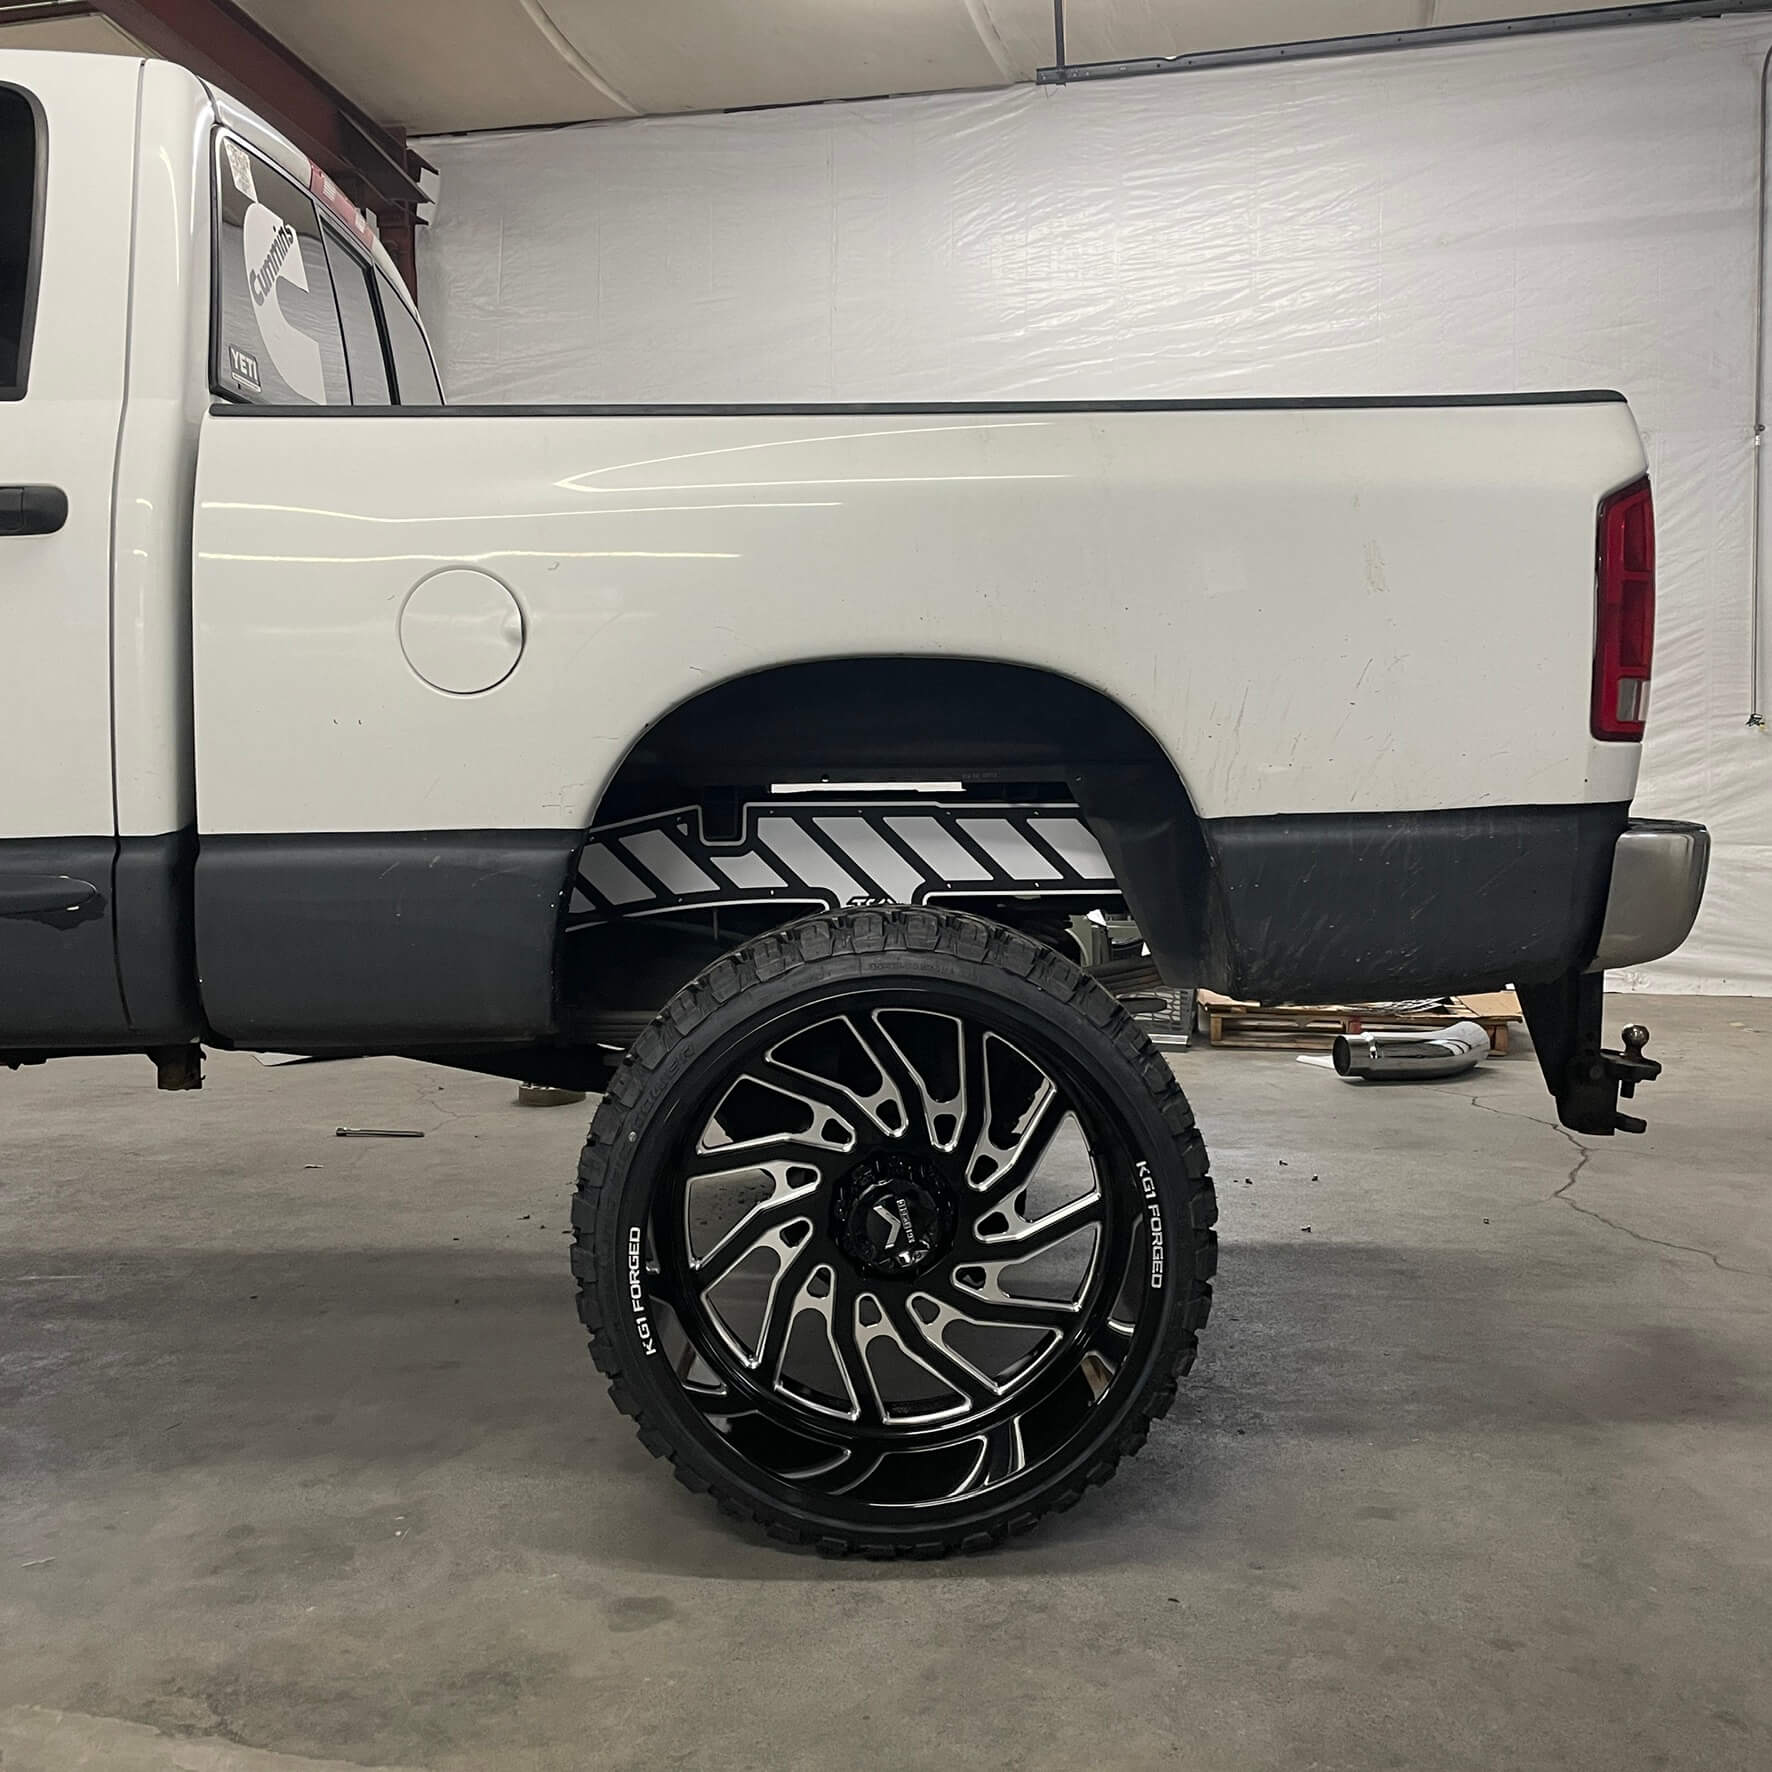 2005 Ram 2500 with KG1 Forged wheels, TSO Octagon Exhaust Tip and TSO Frame Overlays